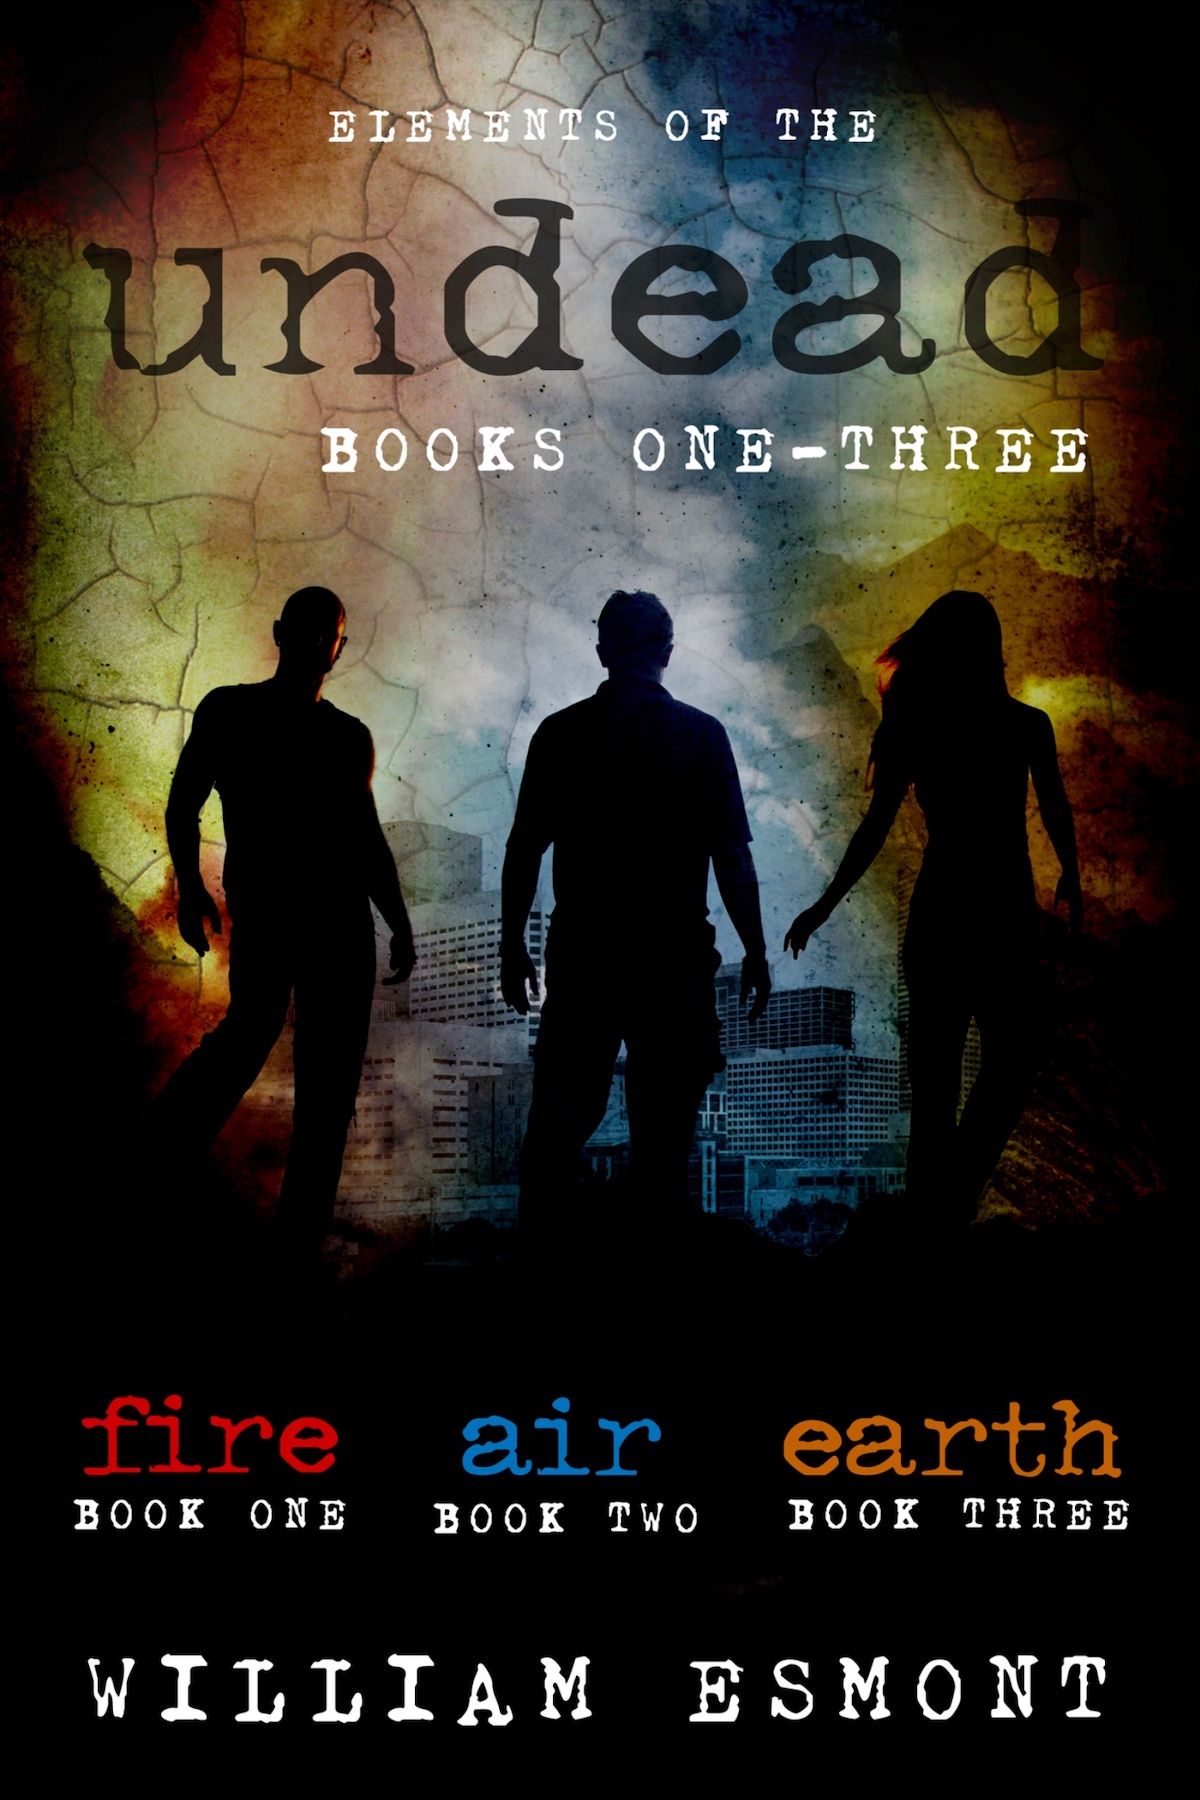 People from the first three elements of the undead book covers